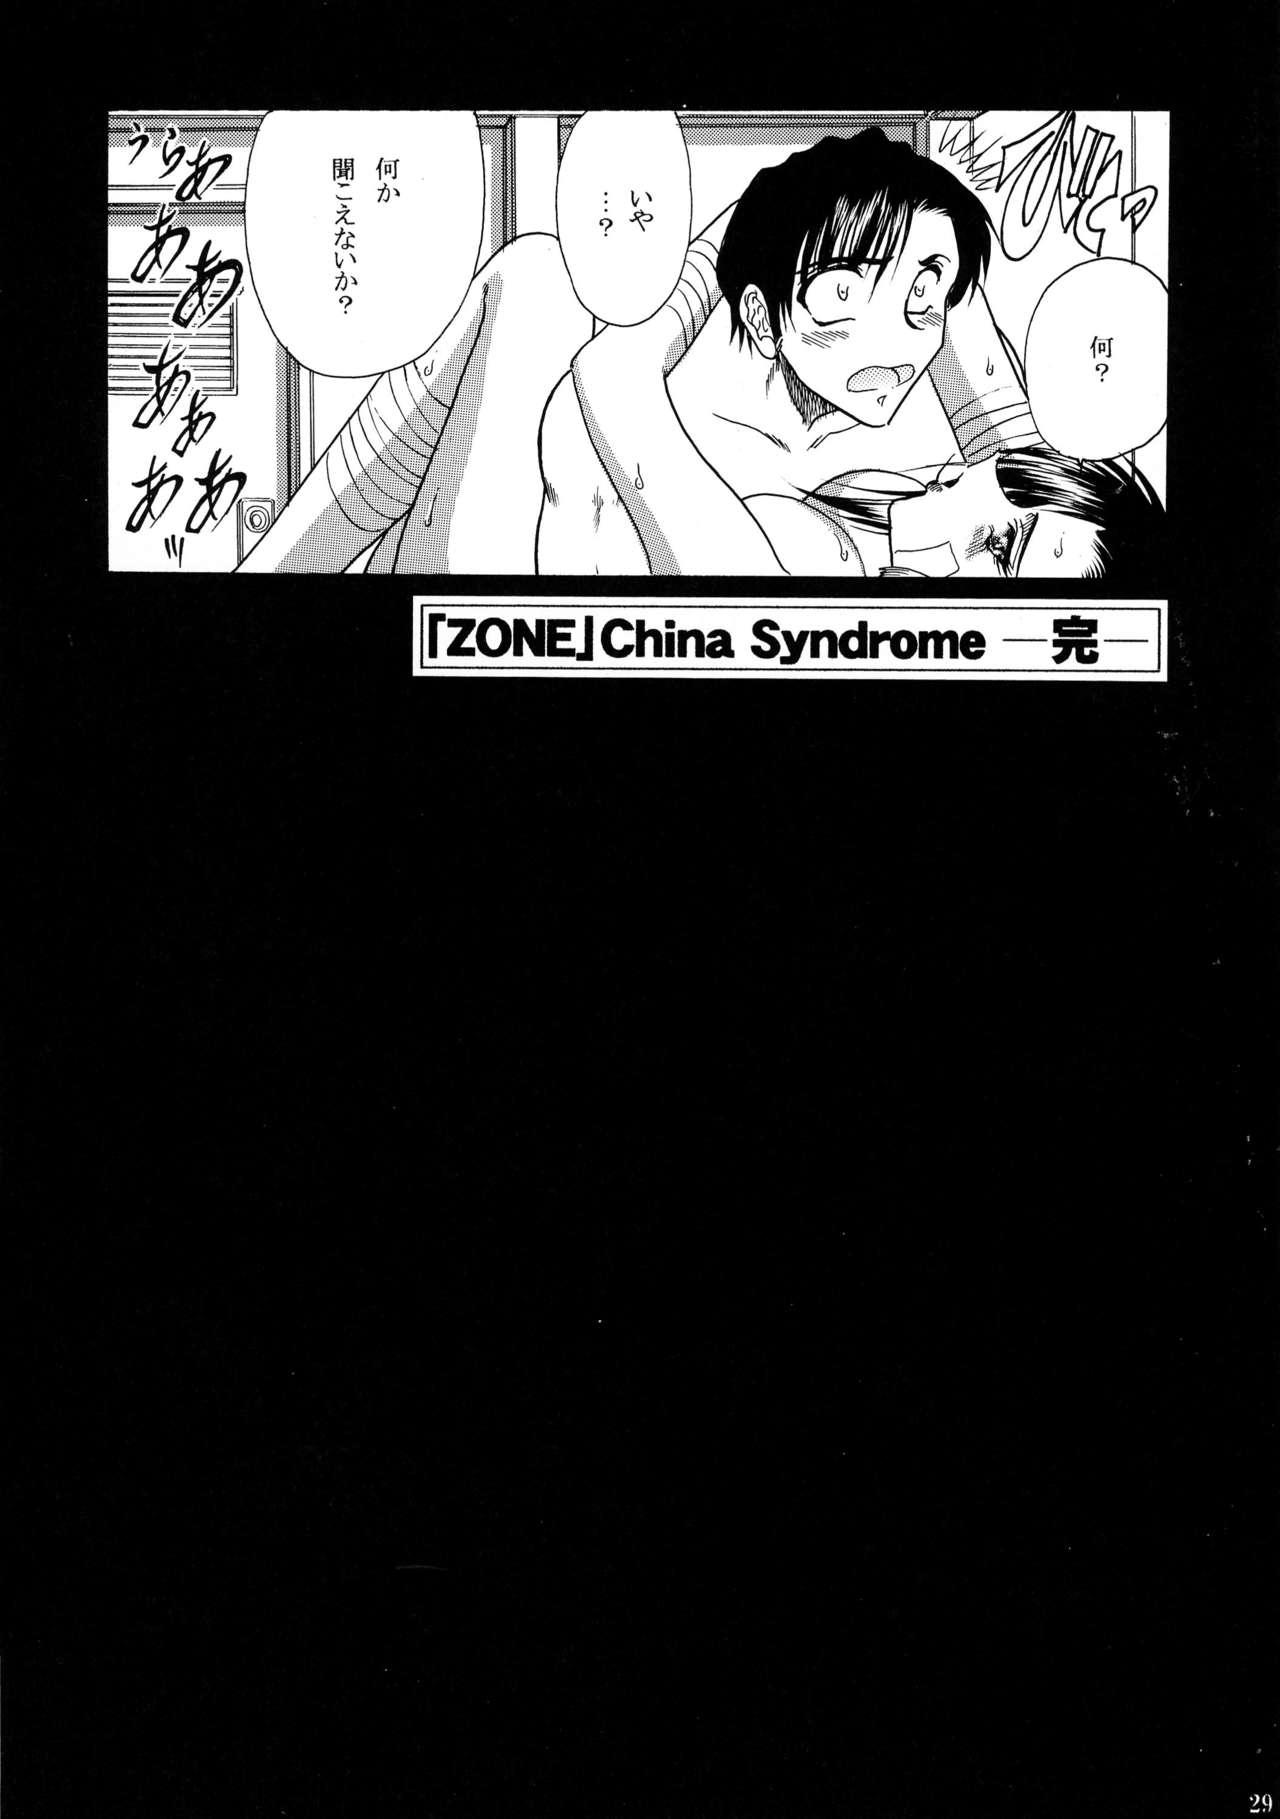 Blowjob ZONE 38 China Syndrome - Black lagoon Speculum - Page 28